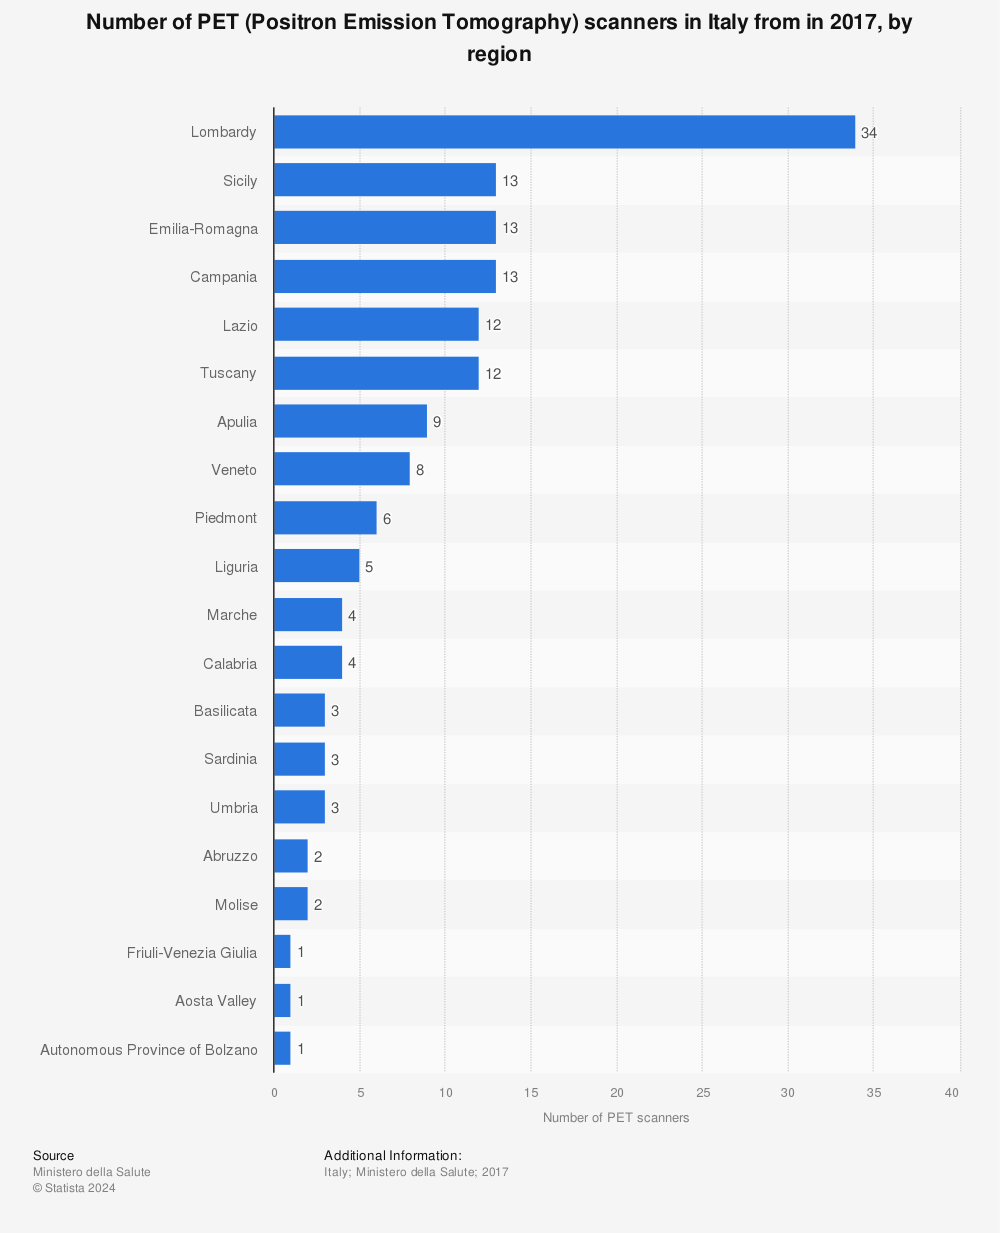 Statistic: Number of PET (Positron Emission Tomography) scanners in Italy from in 2017, by region | Statista